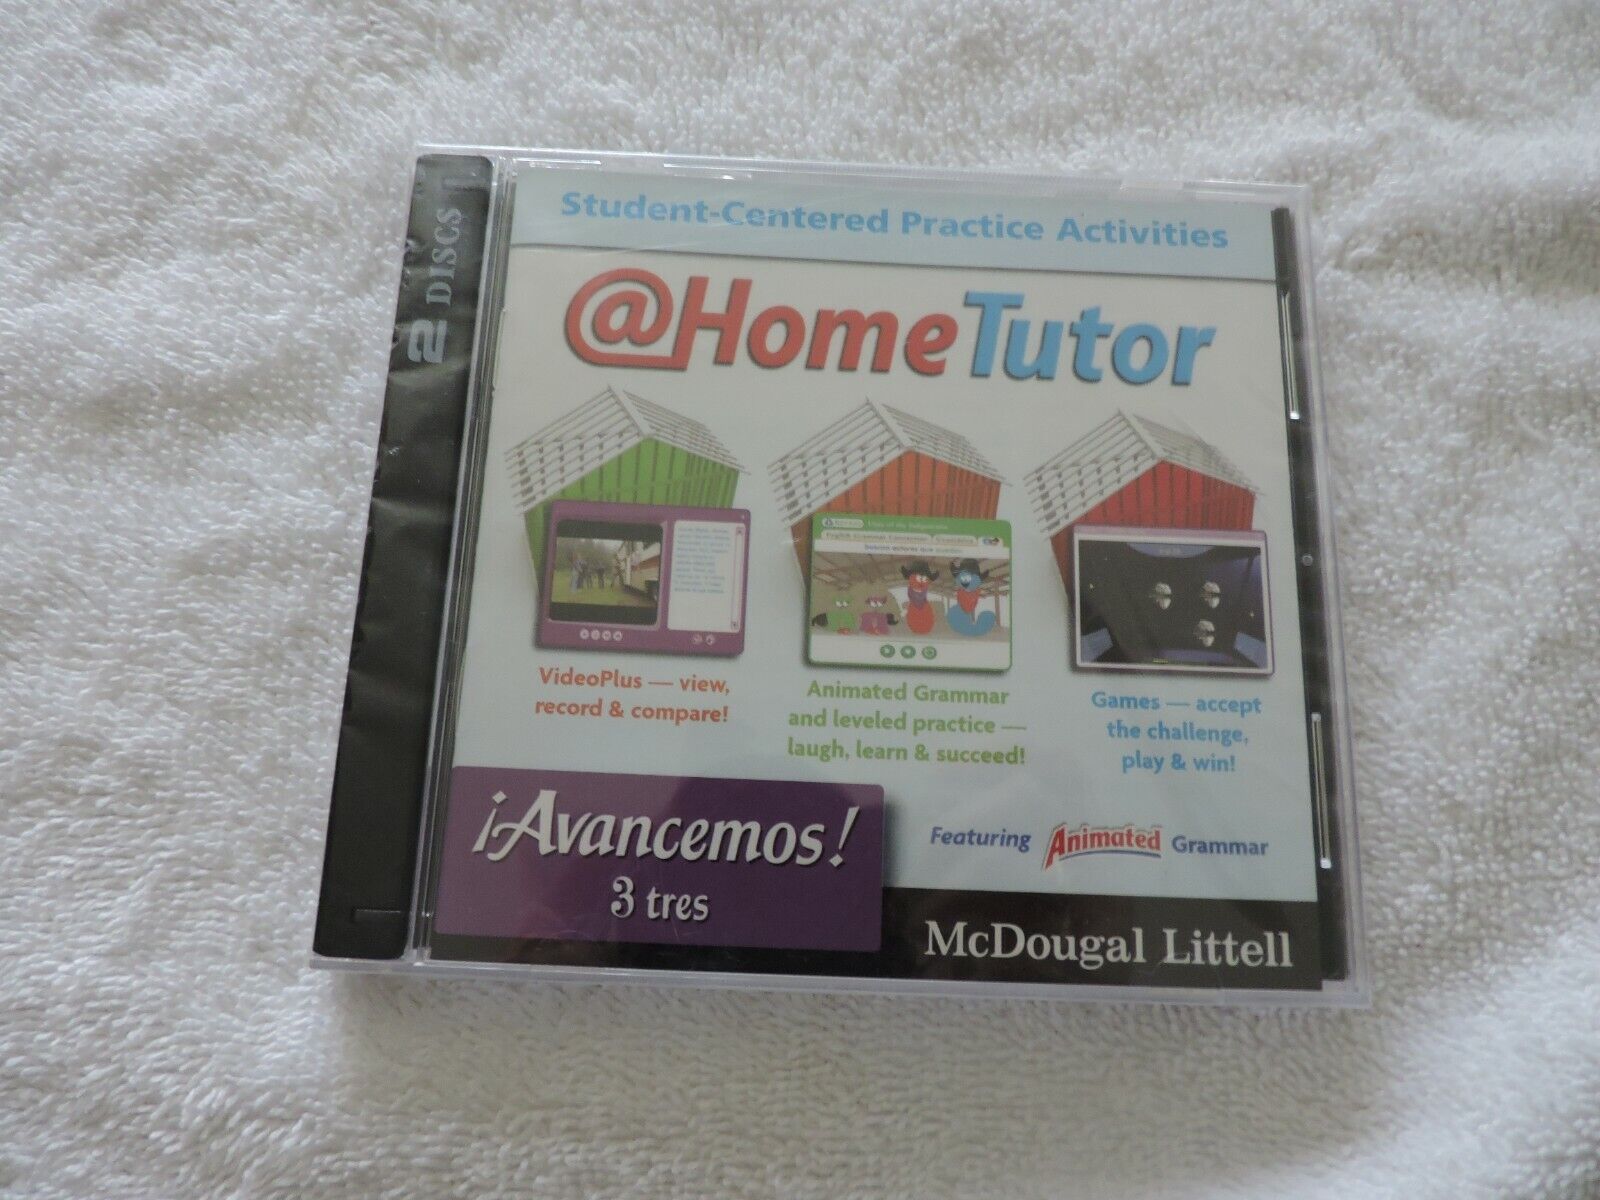  HOMETUTOR: SPANISH GRAMMER LEARNING  2 CD SET  FEATURING ANIMATED GRAMMAR NEW